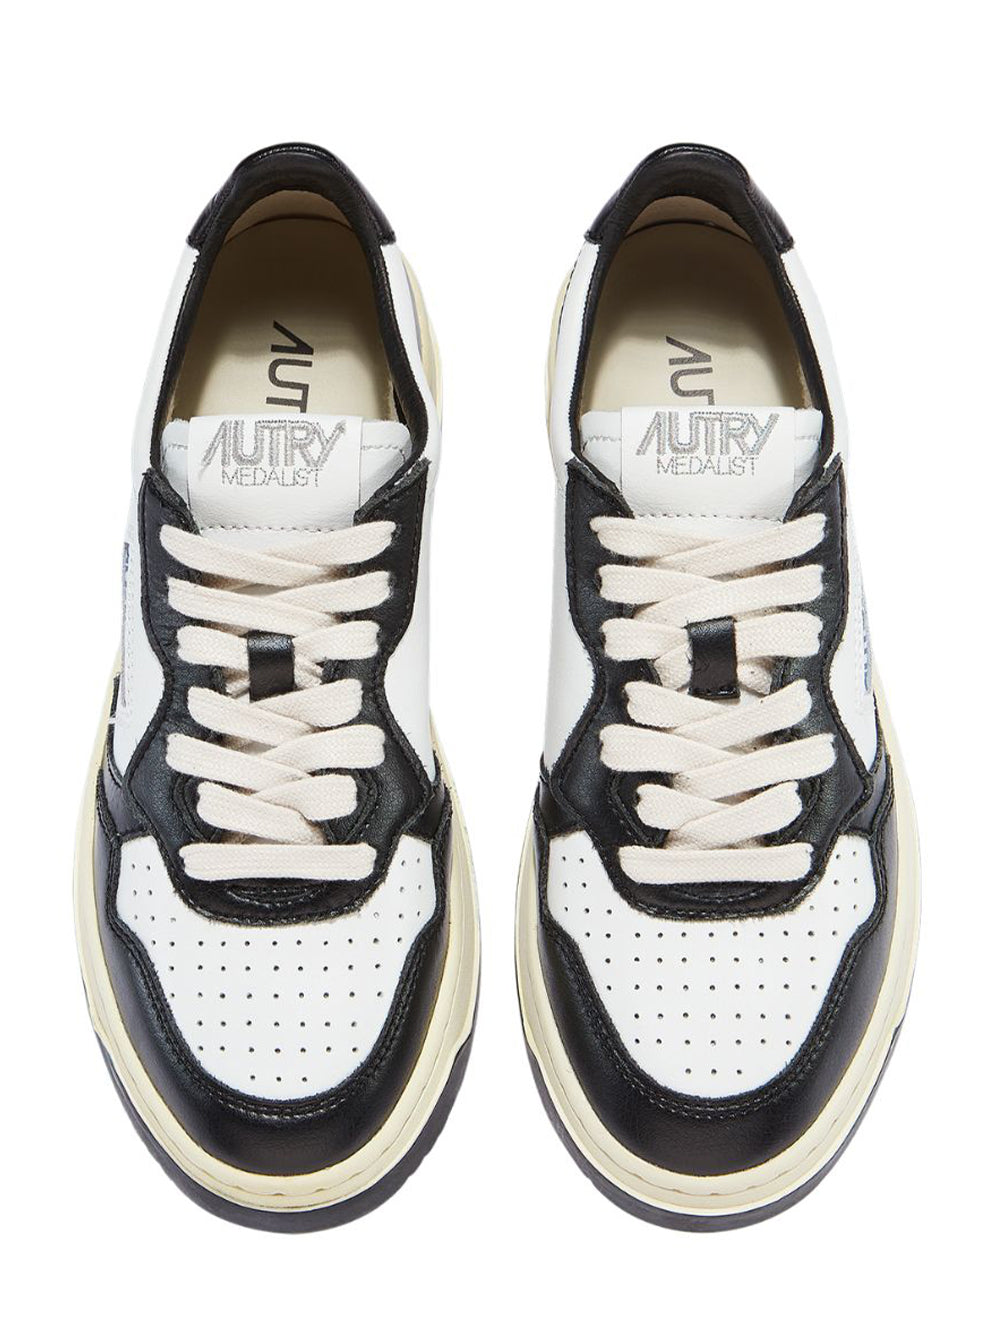 Medalist Low Sneakers In Two-Tone Leather Color White And Black (Men)